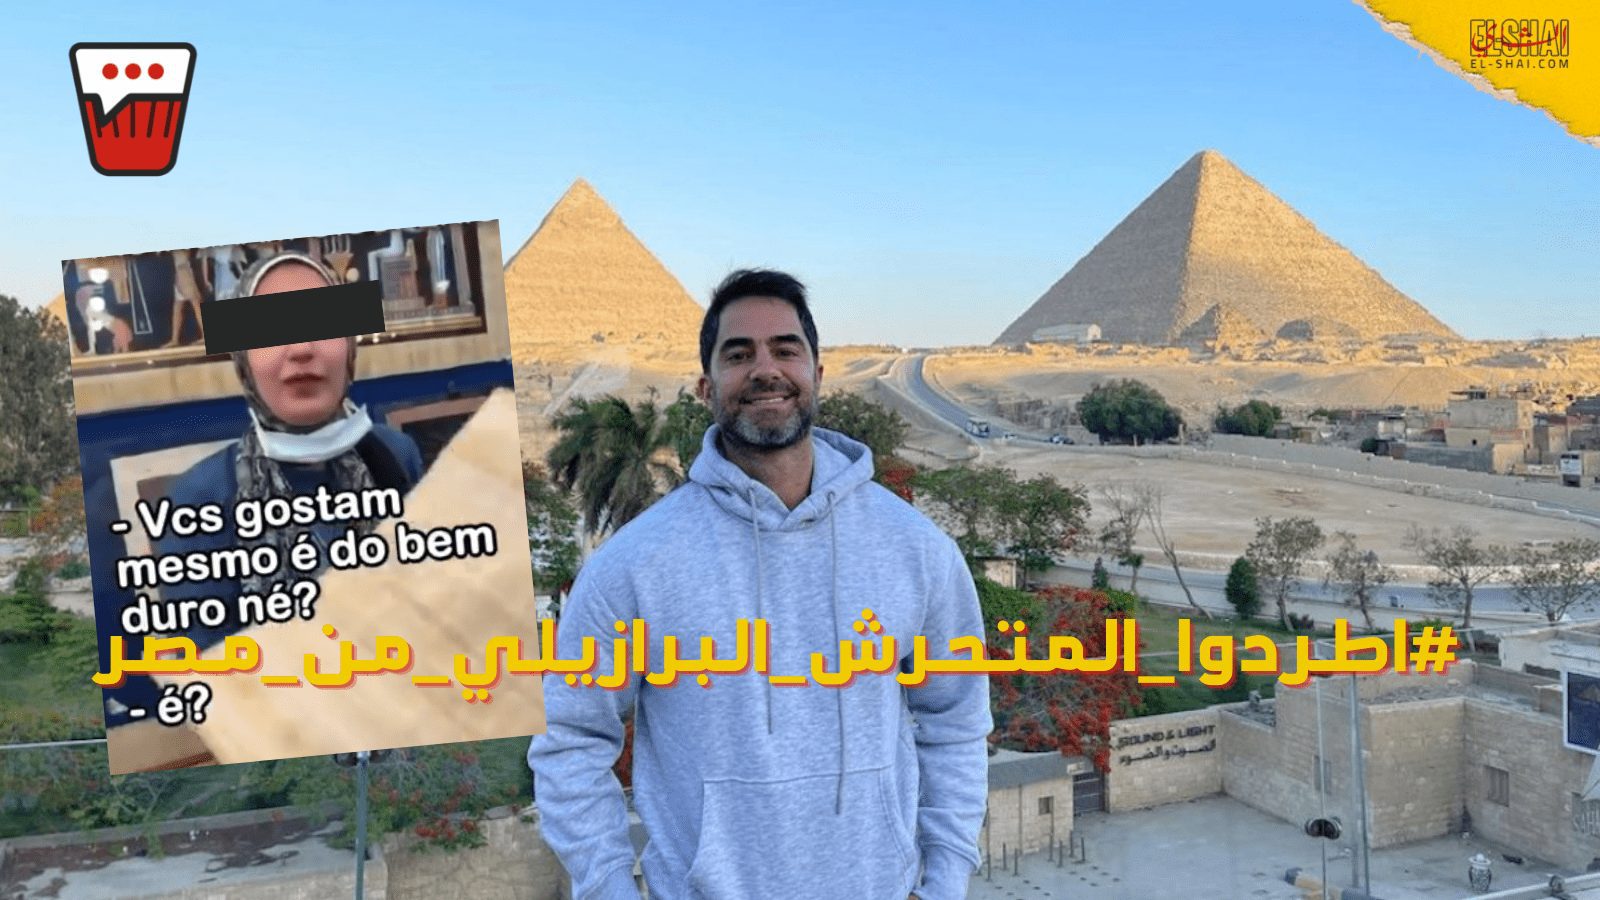 Victor Sorrentino A Brazilian Doctor and Influencer Harasses an Egyptian woman on Camera for His Million Followers (1)